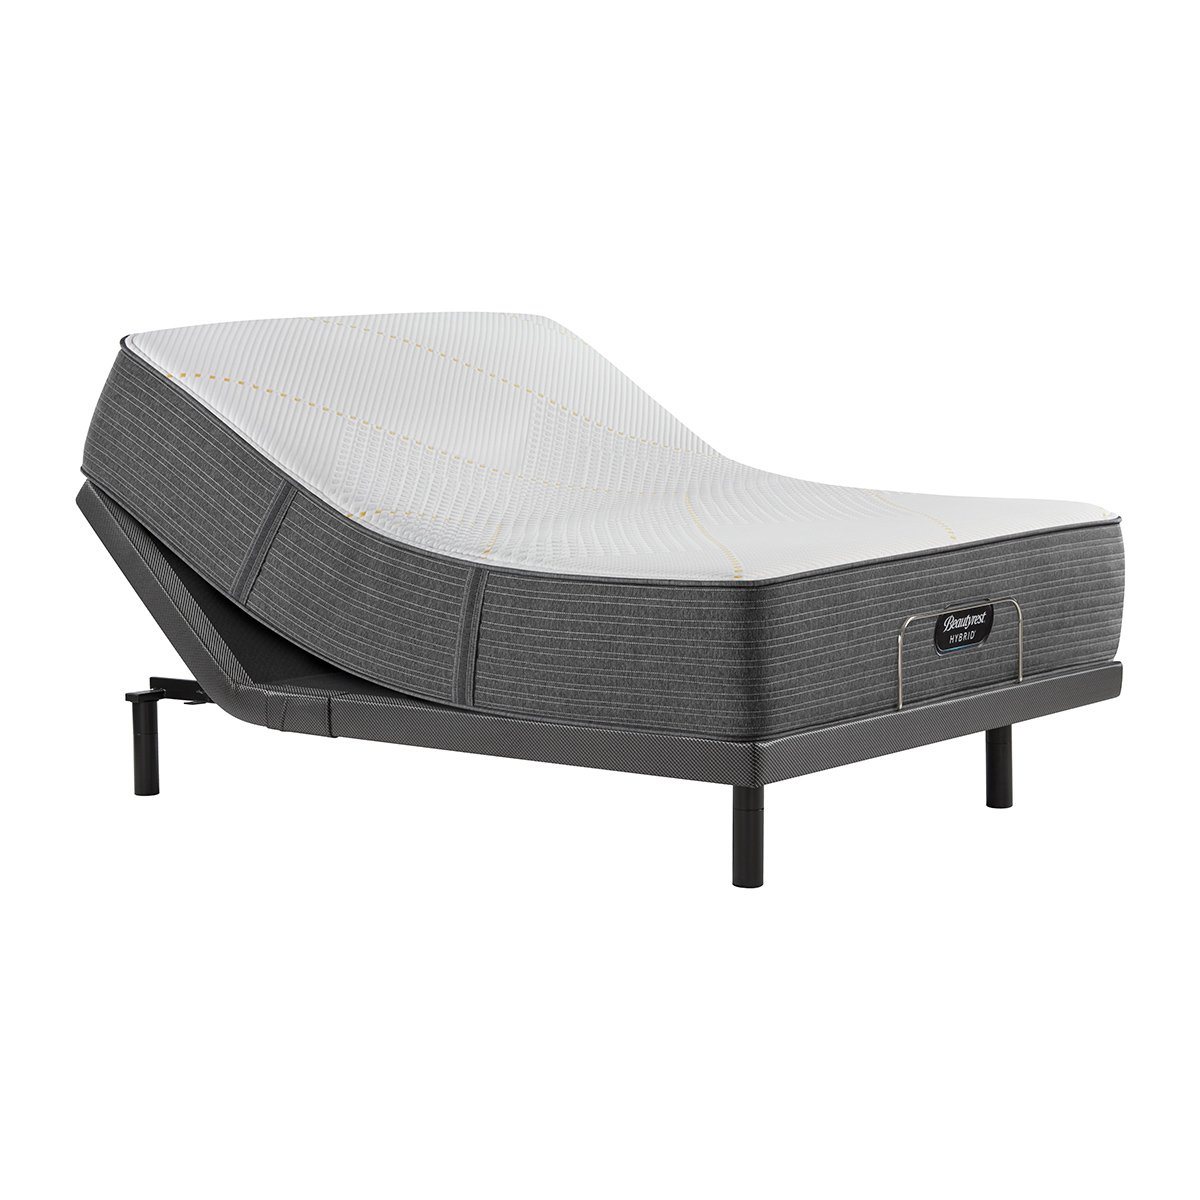 Beautyrest Advanced Motion Adjustable Base With Mattress